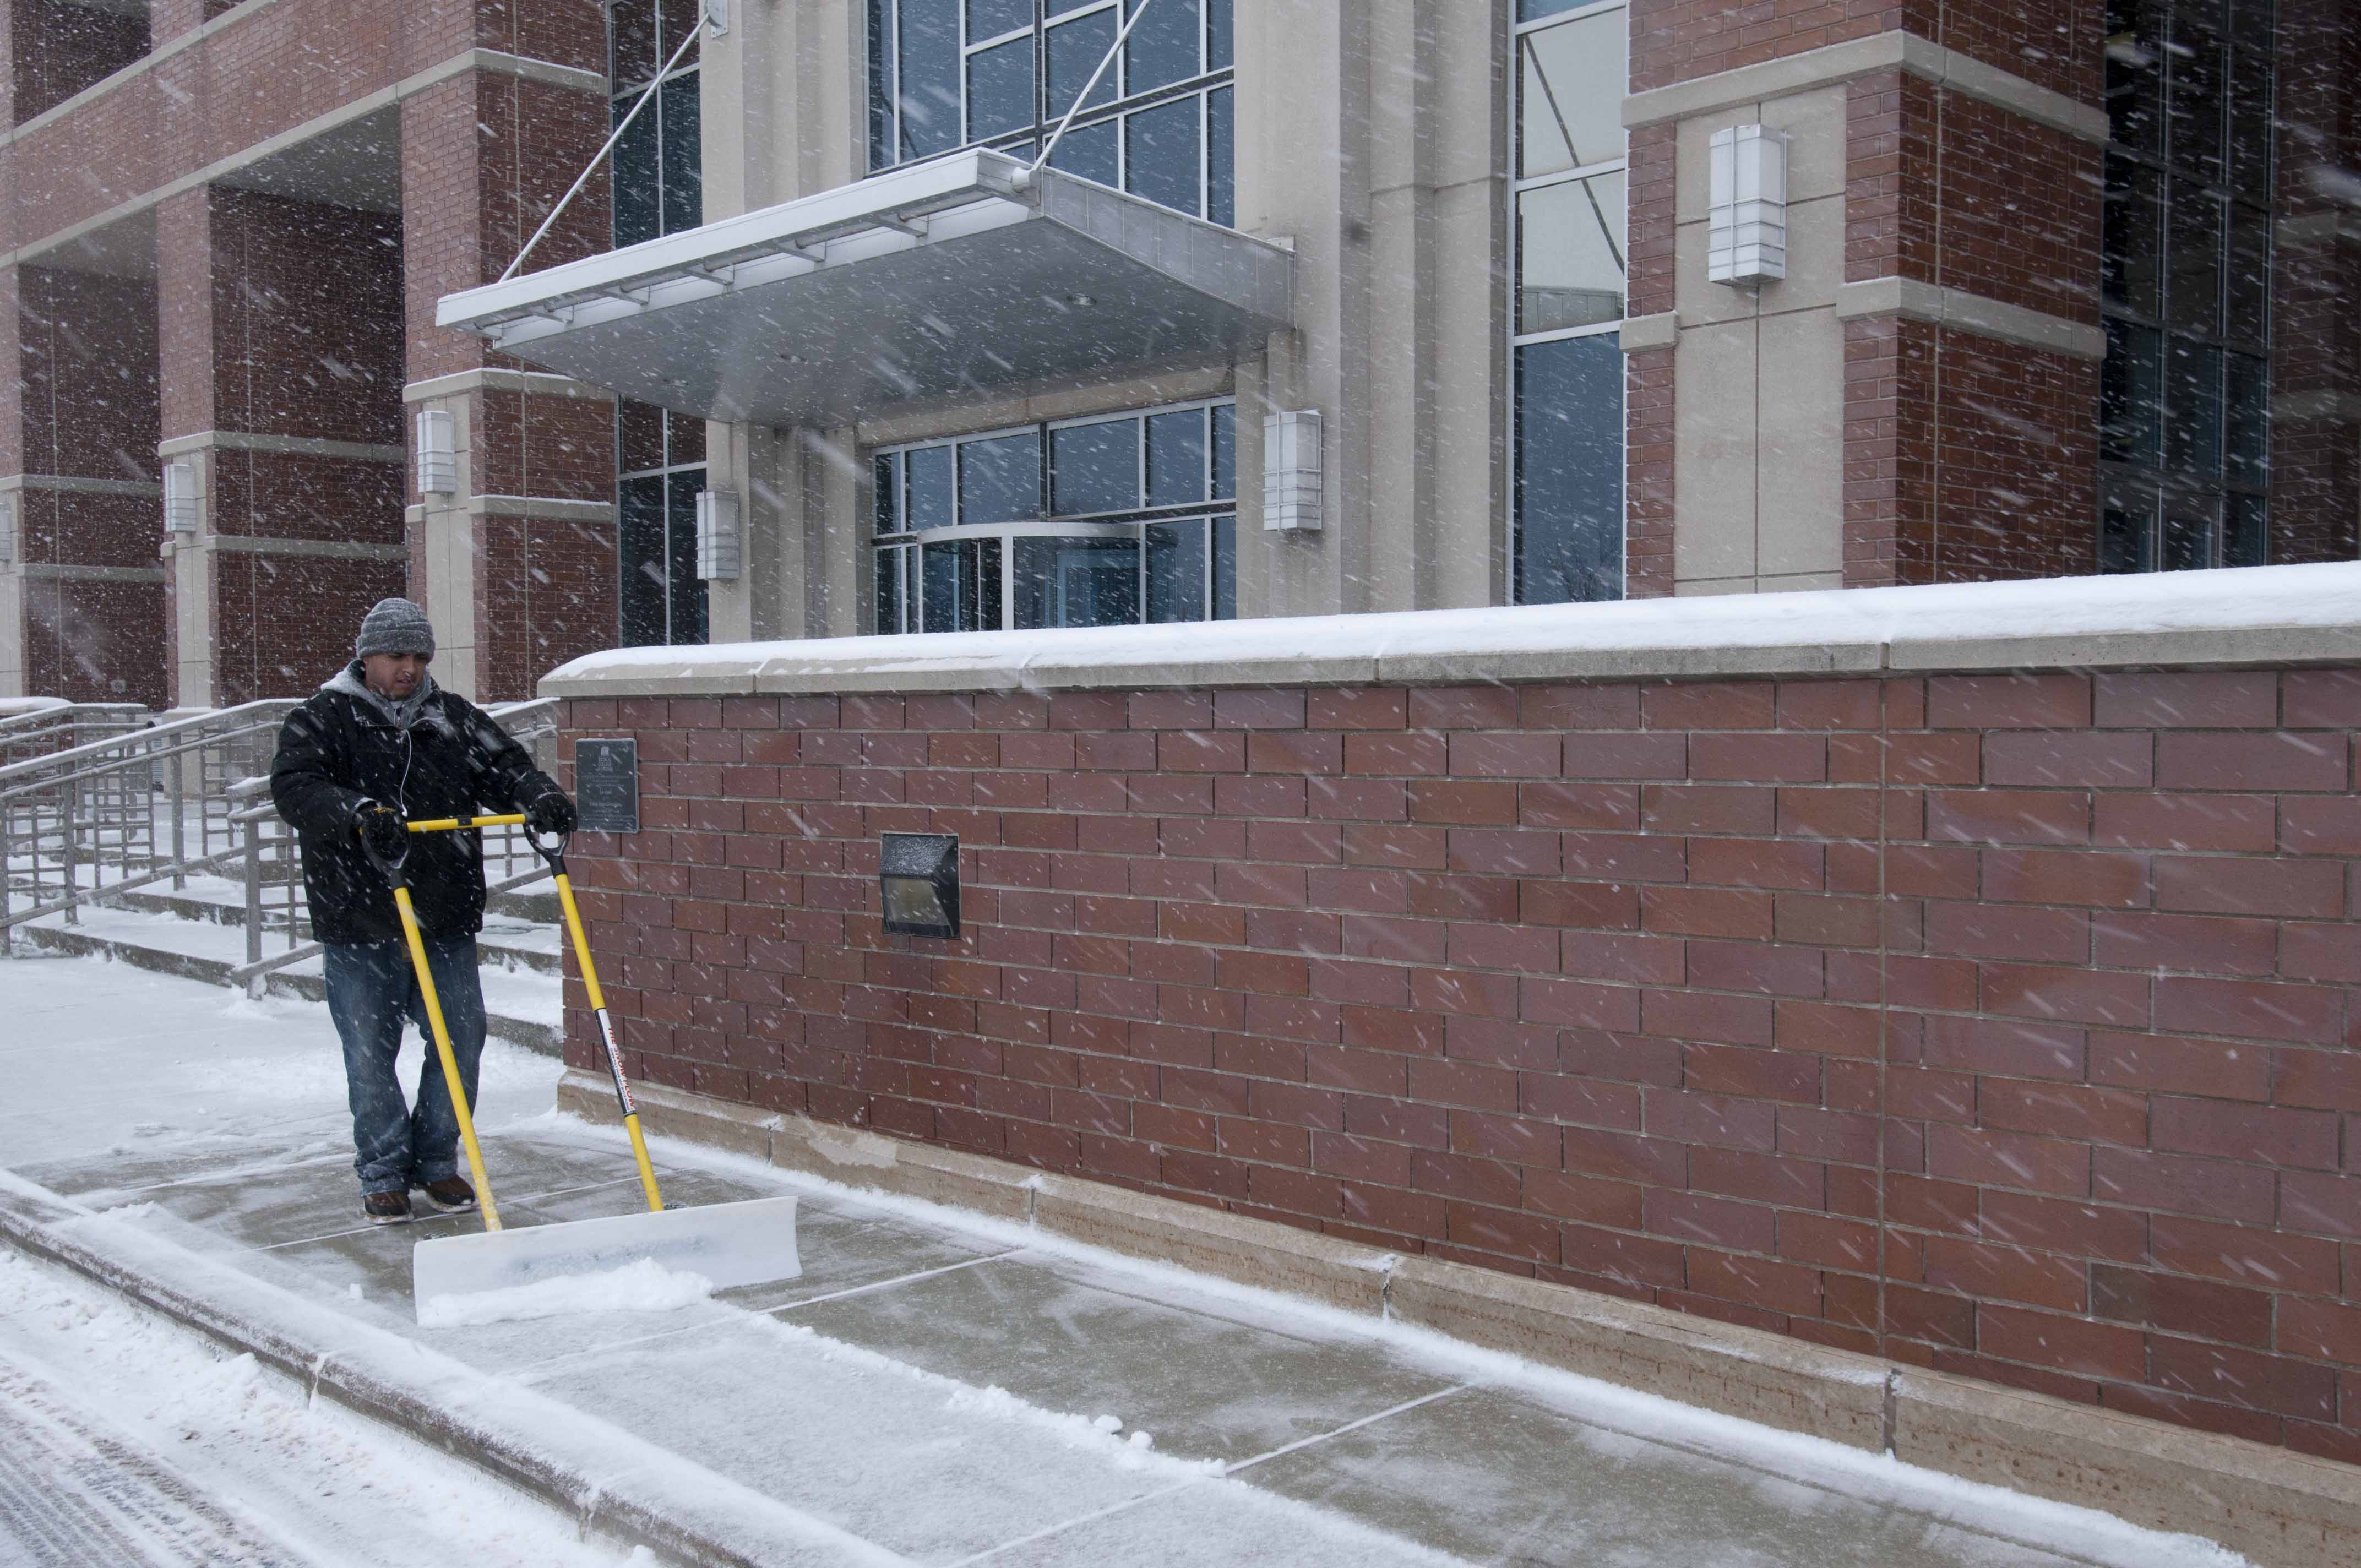 Shoveling Snow to Ensure Sidewalks are Clear and Safe